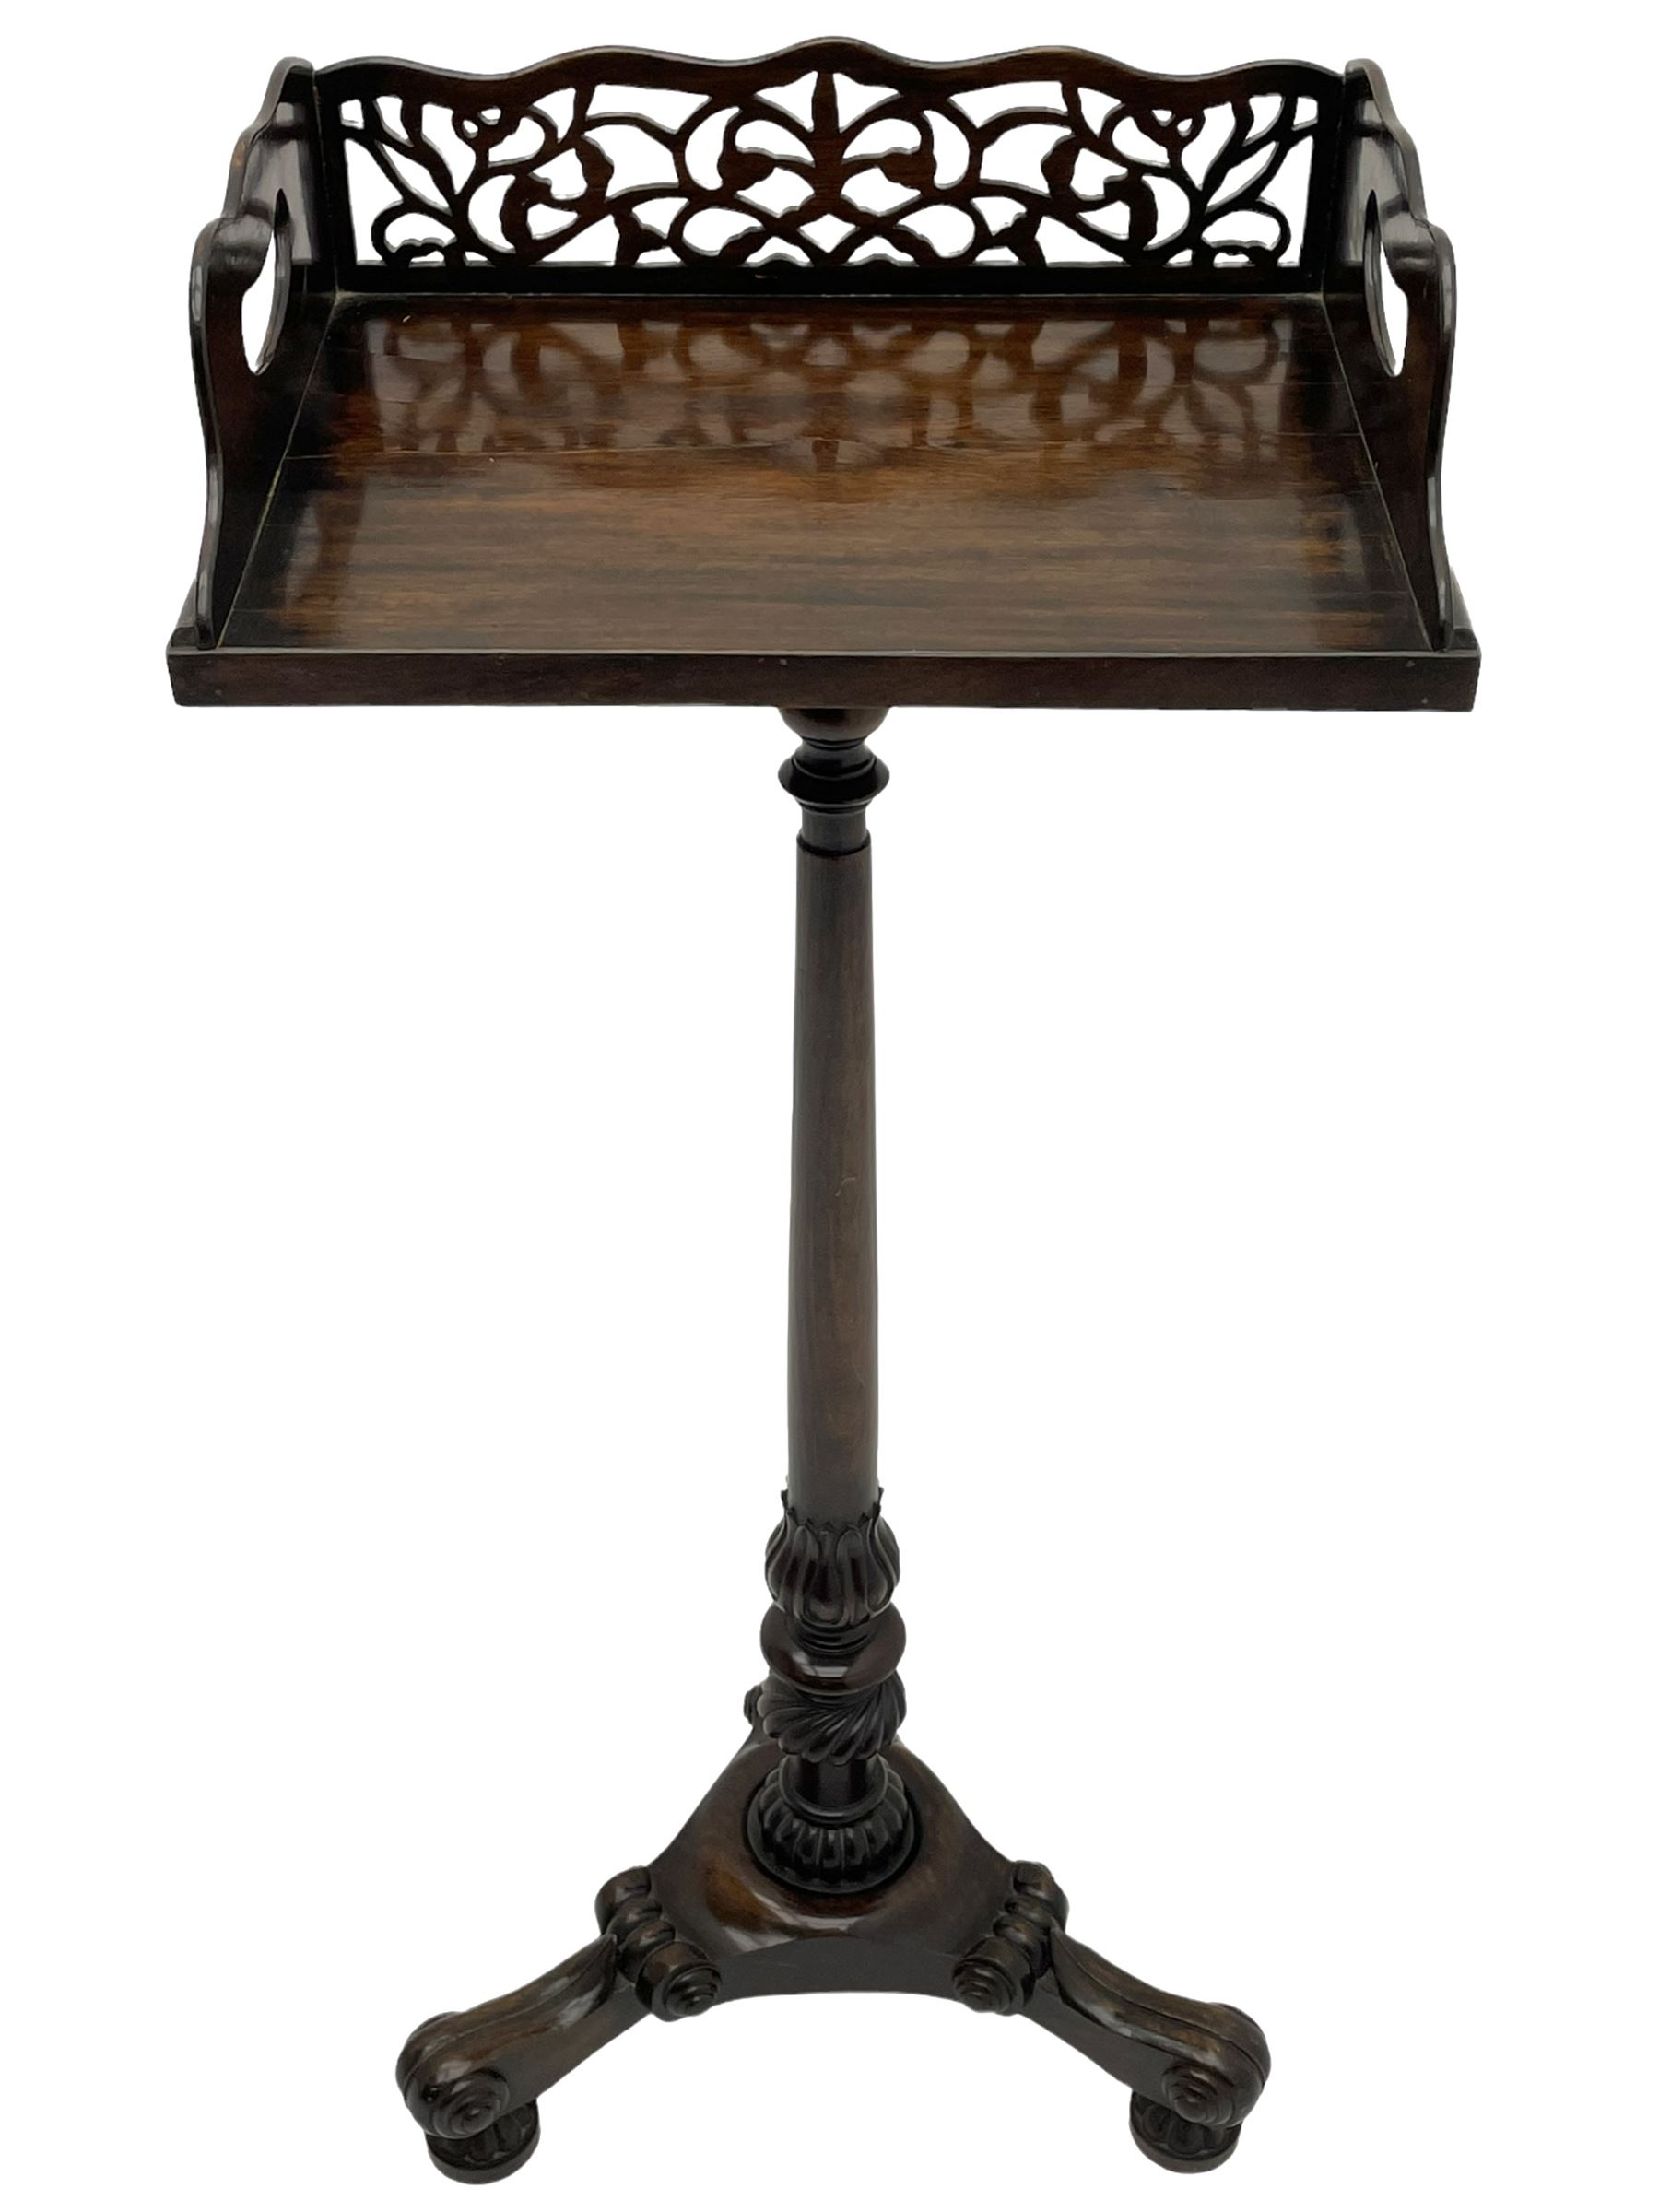 Regency style hardwood book tray on stand